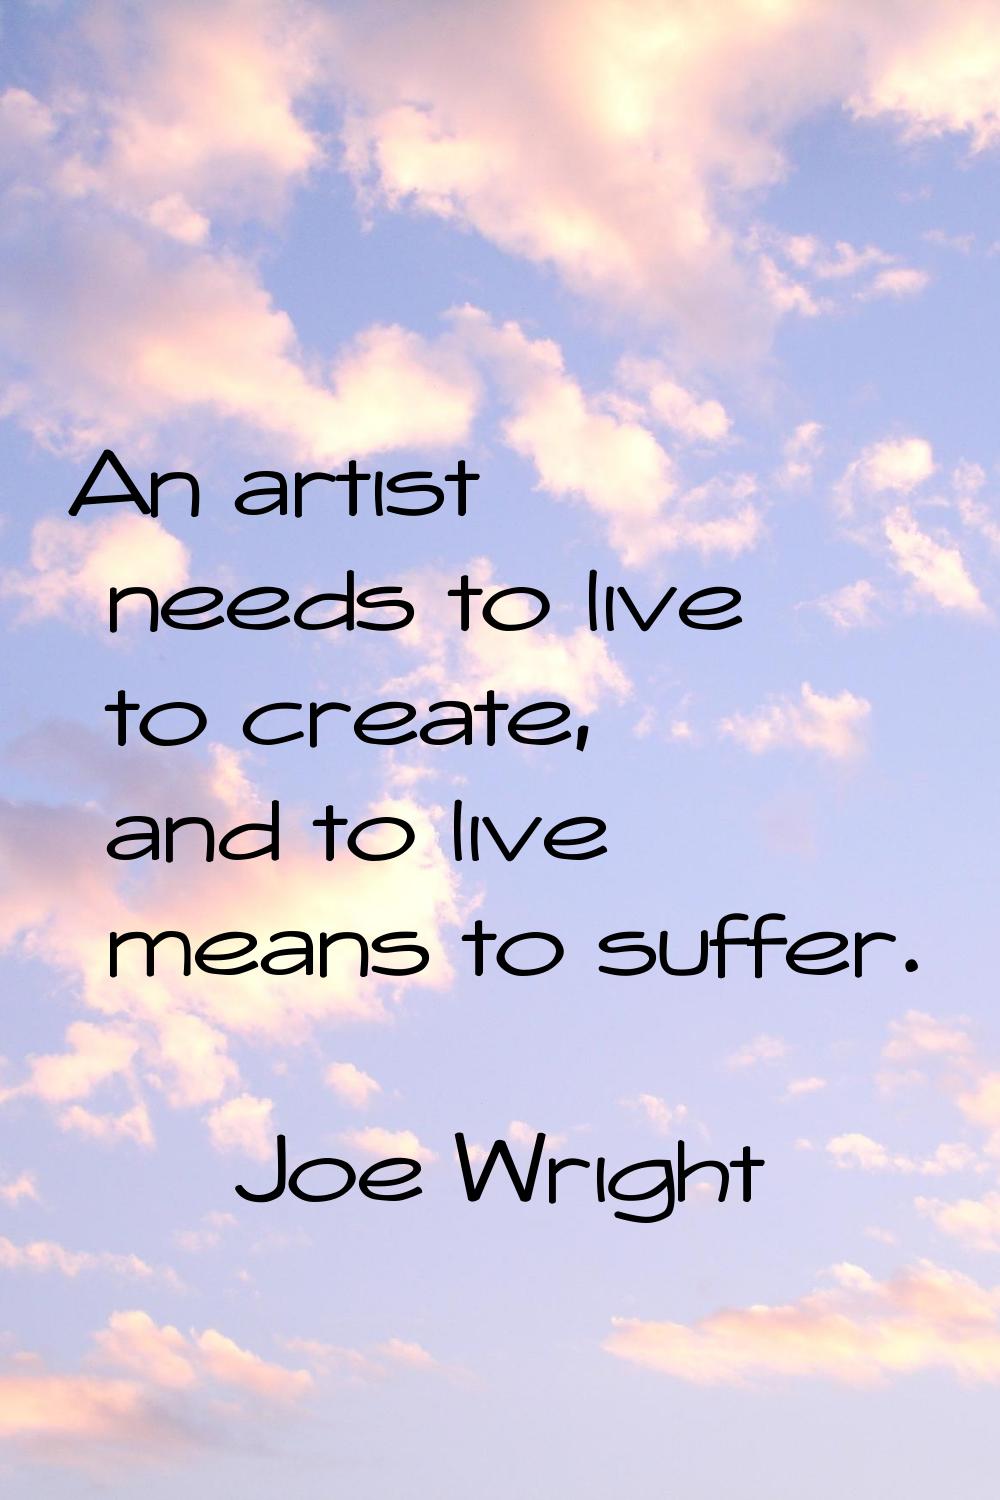 An artist needs to live to create, and to live means to suffer.